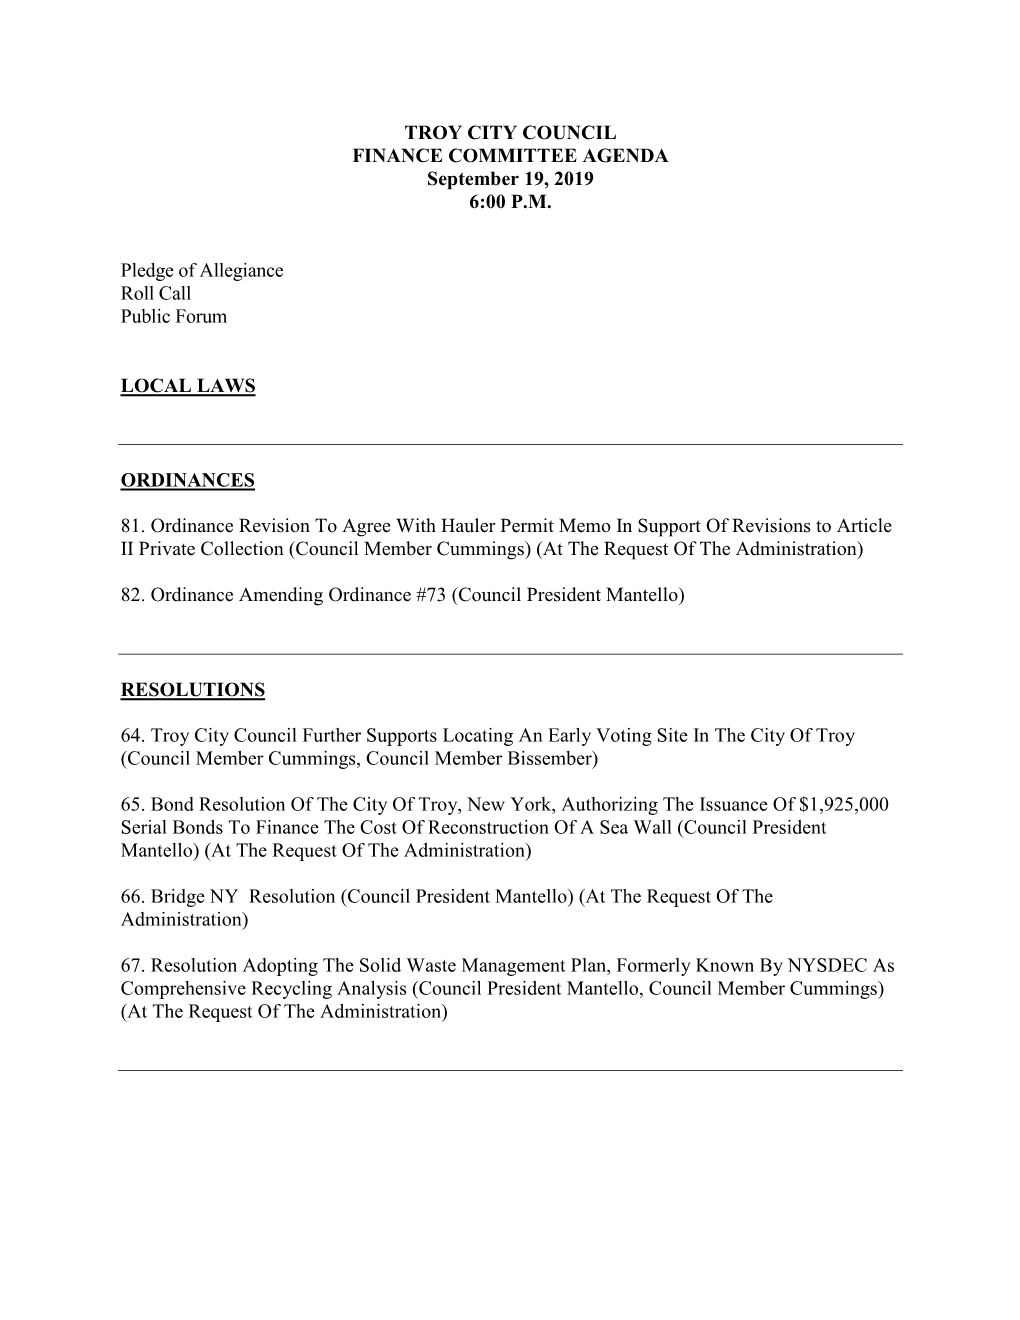 TROY CITY COUNCIL FINANCE COMMITTEE AGENDA September 19, 2019 6:00 P.M